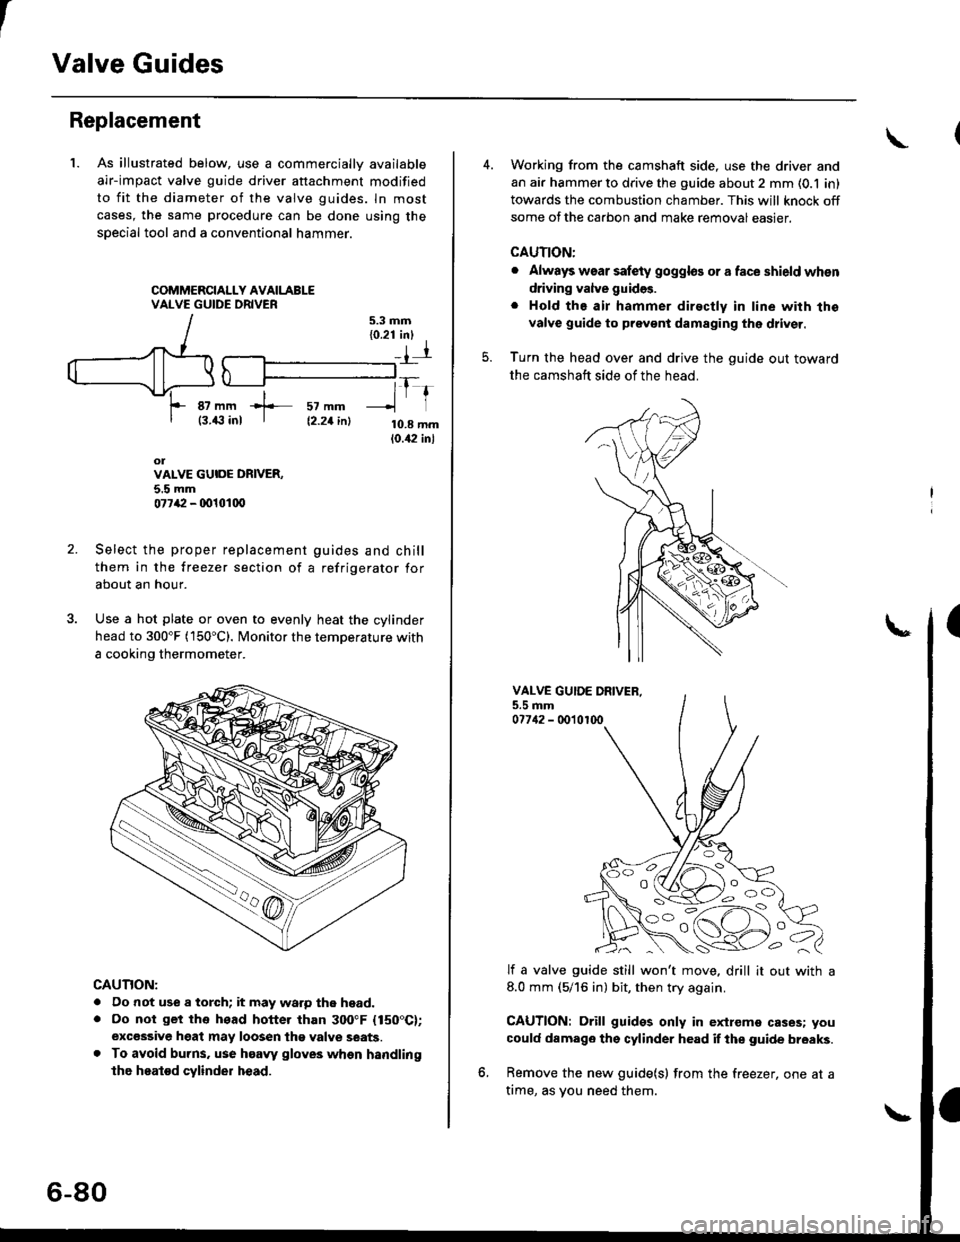 HONDA CIVIC 1997 6.G Workshop Manual t
Valve Guides
Replacement
1. As illustrated below, use a commerciallv available
air-impact valve guide driver attachment modified
to fit the diameter of the valve guides. ln most
cases, the same proc